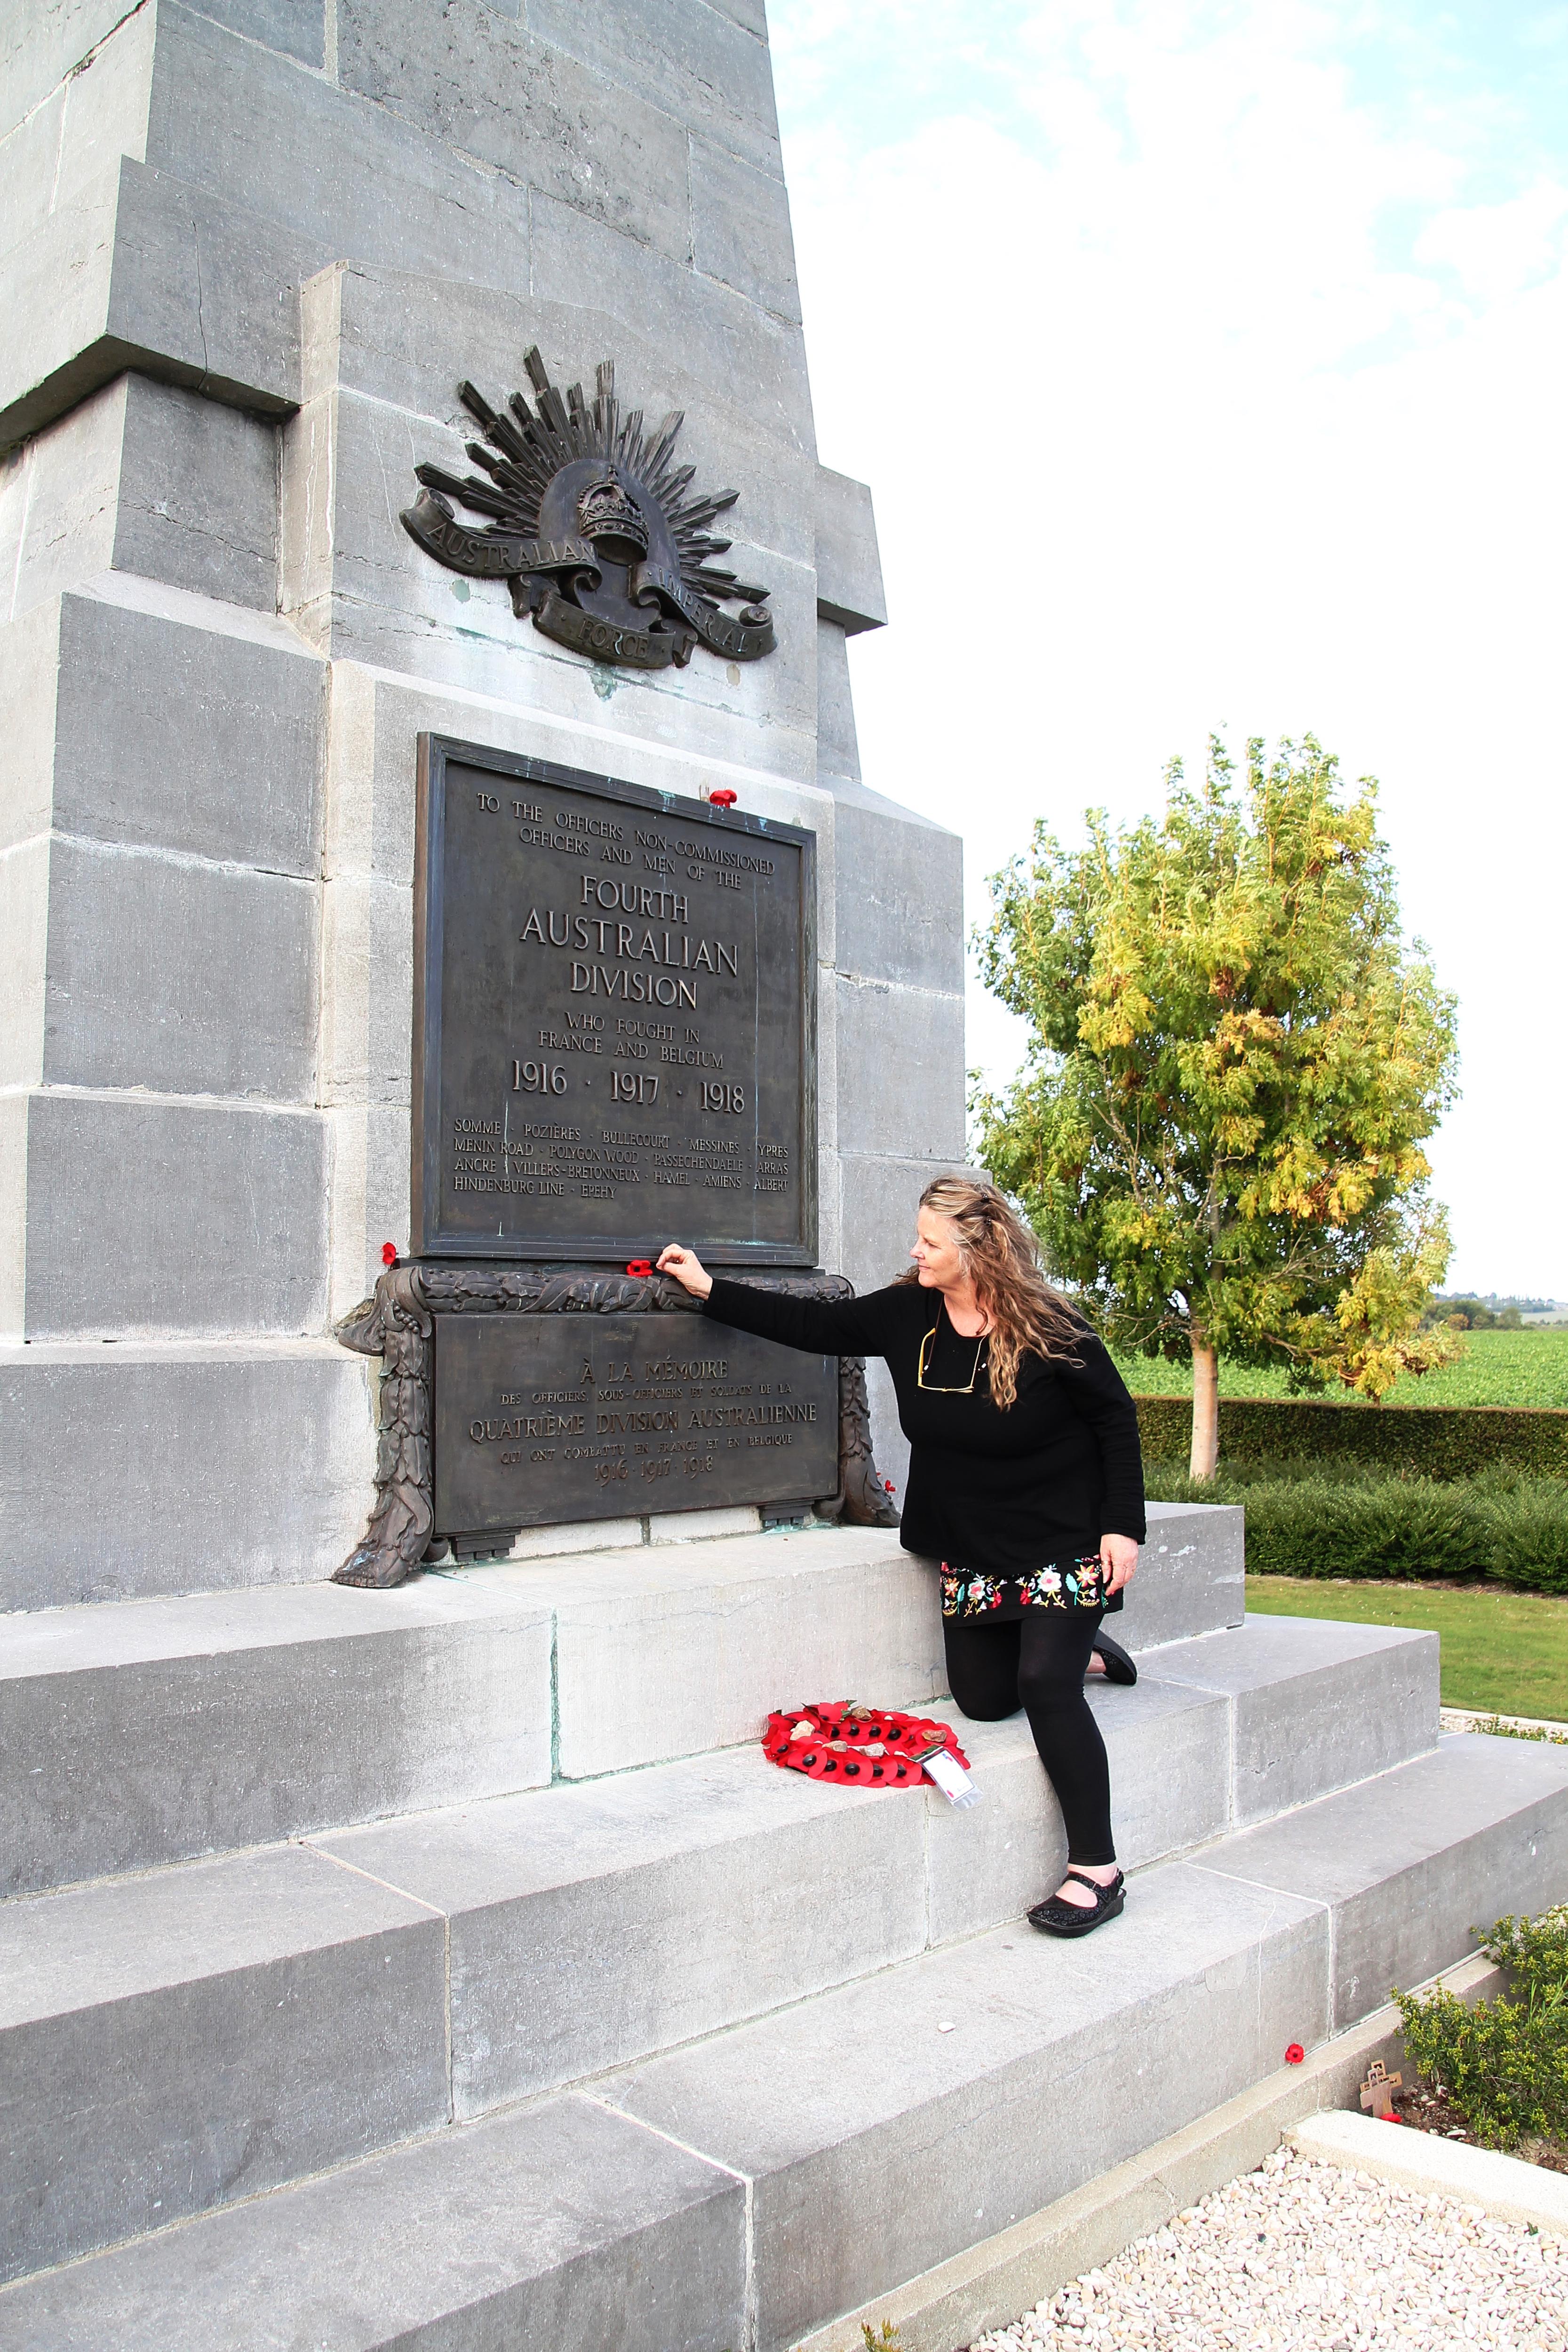 Lady with a black dress and long hair placing a poppy beneath the metal plate on a large cenotaph, 